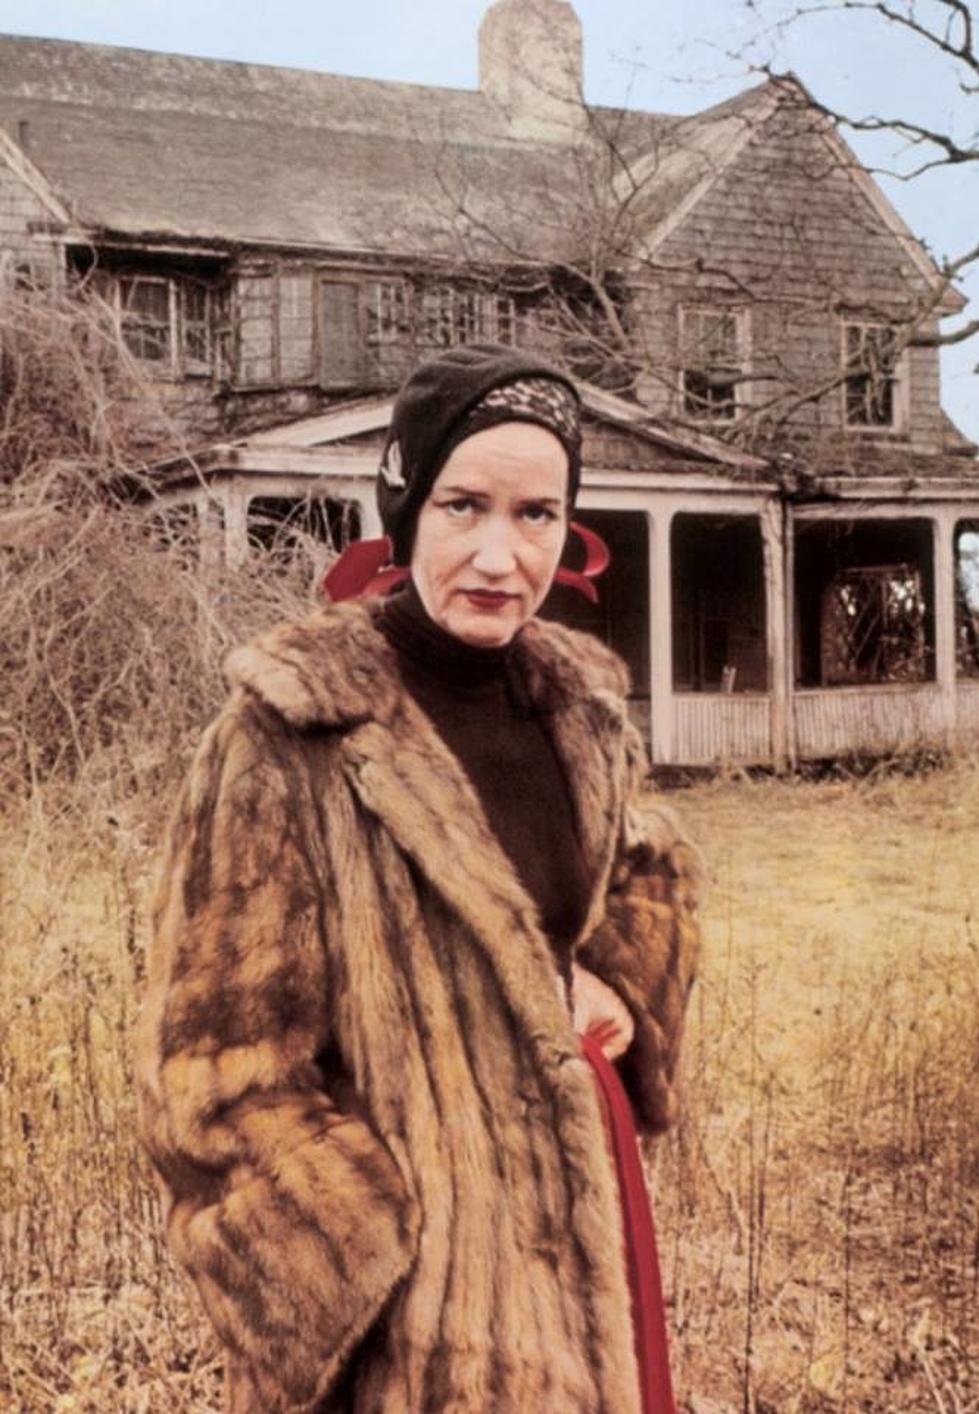 River City Rep Opens Its 11th Season And A New Theatre With ‘Grey Gardens’